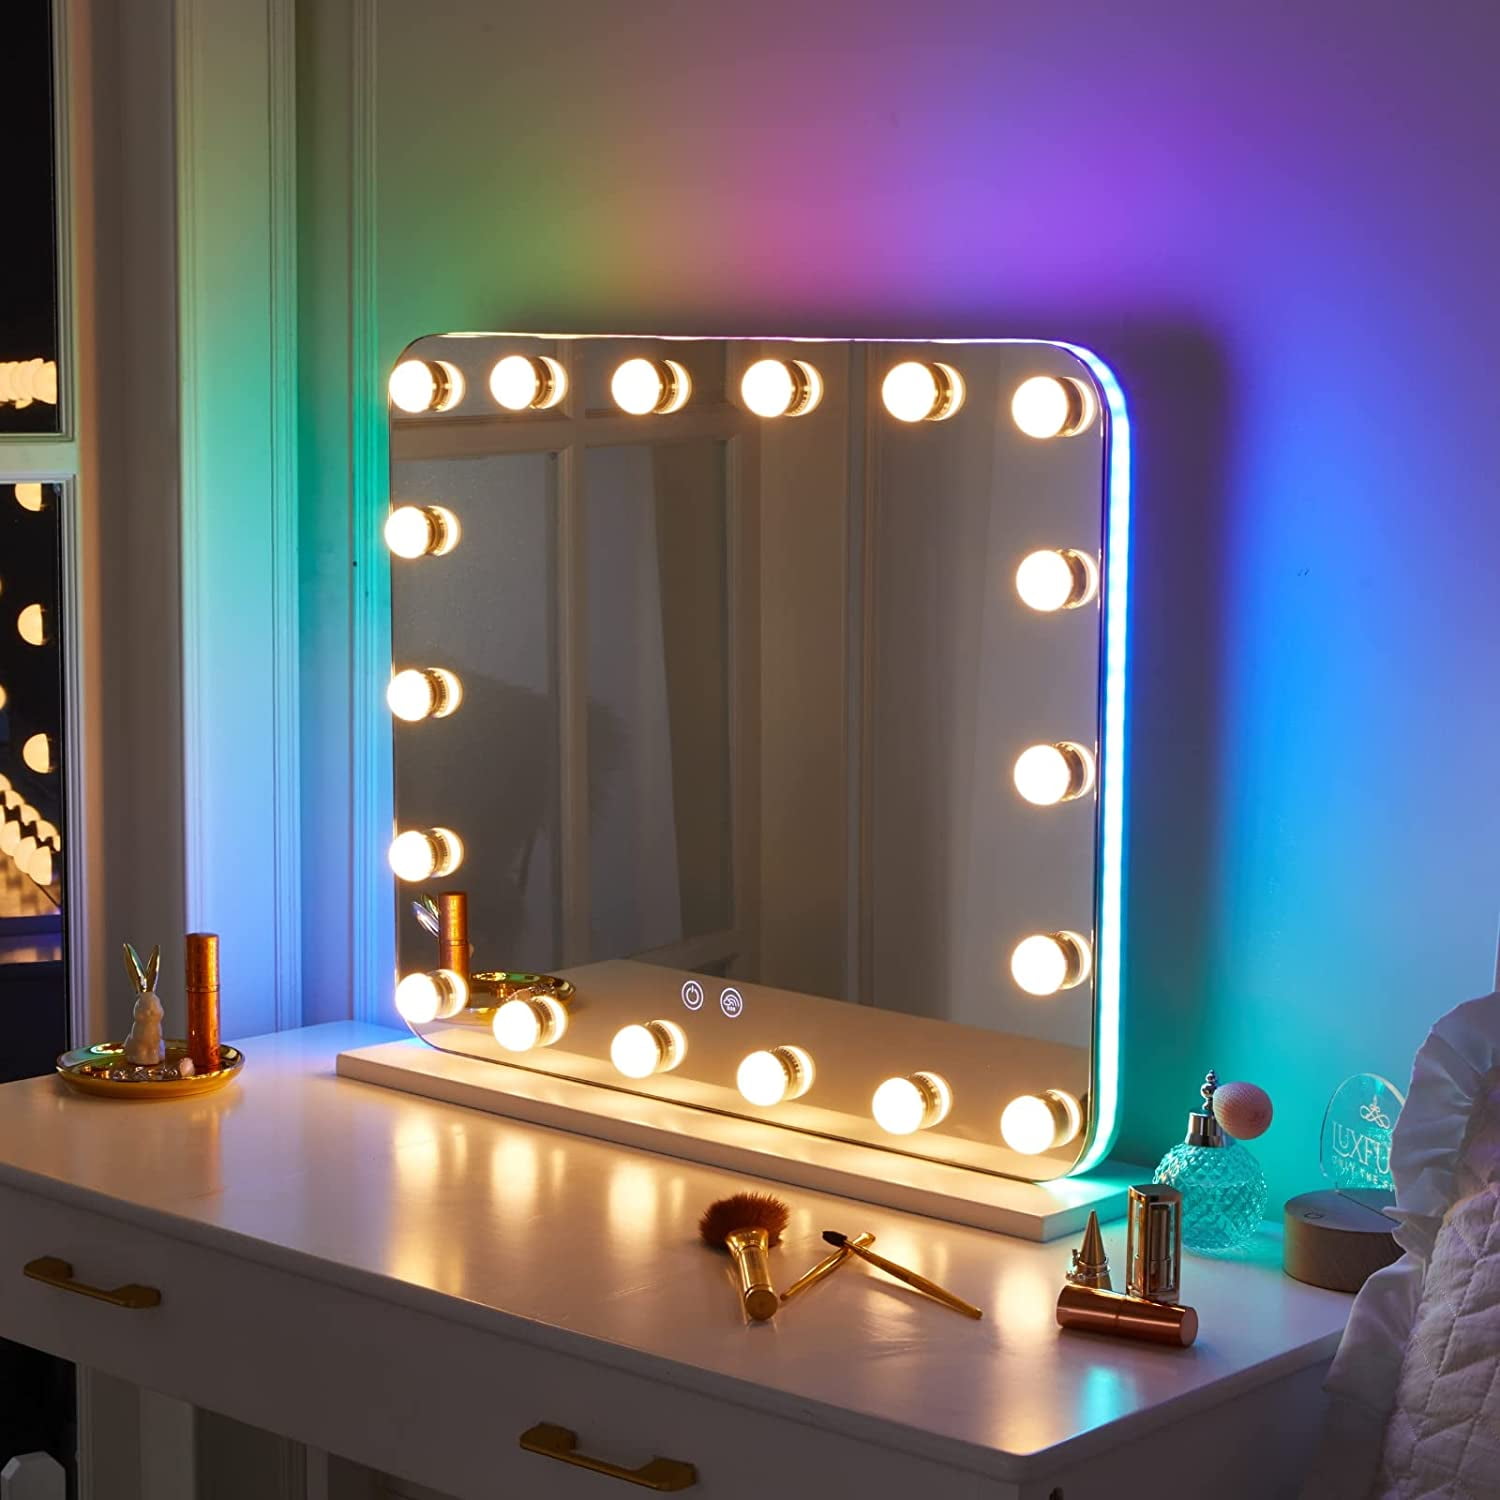 LUXFURNI Vanity Mirror with Makeup Lights, Large Hollywood Light up Mirrors  w/ 18 LED Bulbs for Bedroom Tabletop & Wall Mounted (26Lx21W, White)